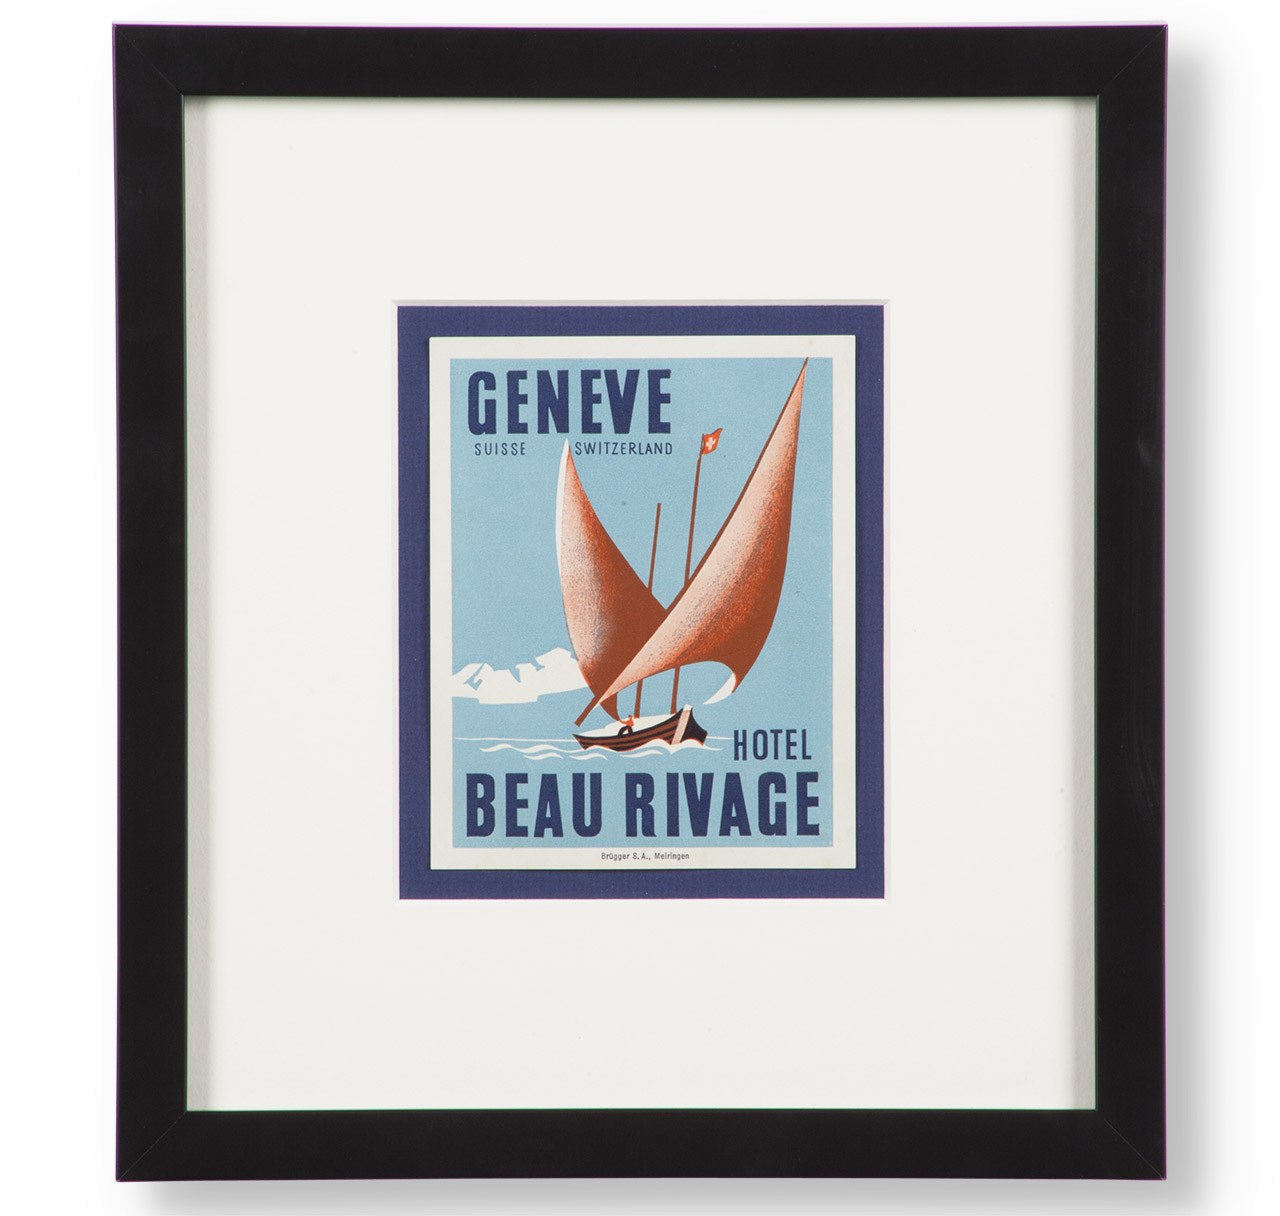 Hotel Beau Rivage Geneve Luggage Label